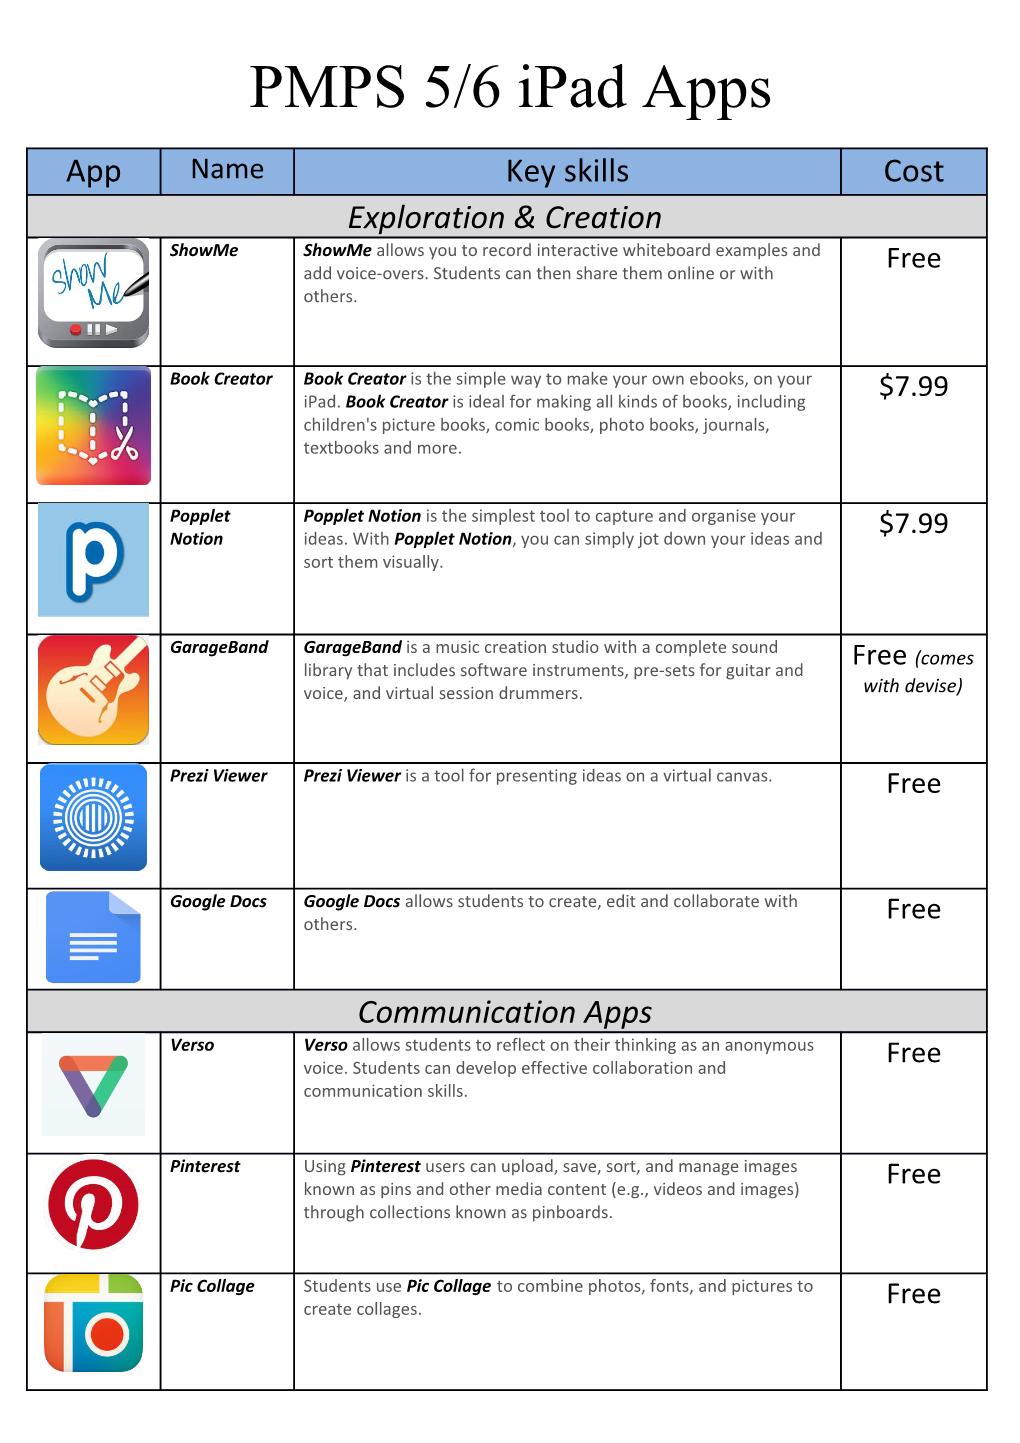 PMPS 5/6 Ipad Apps